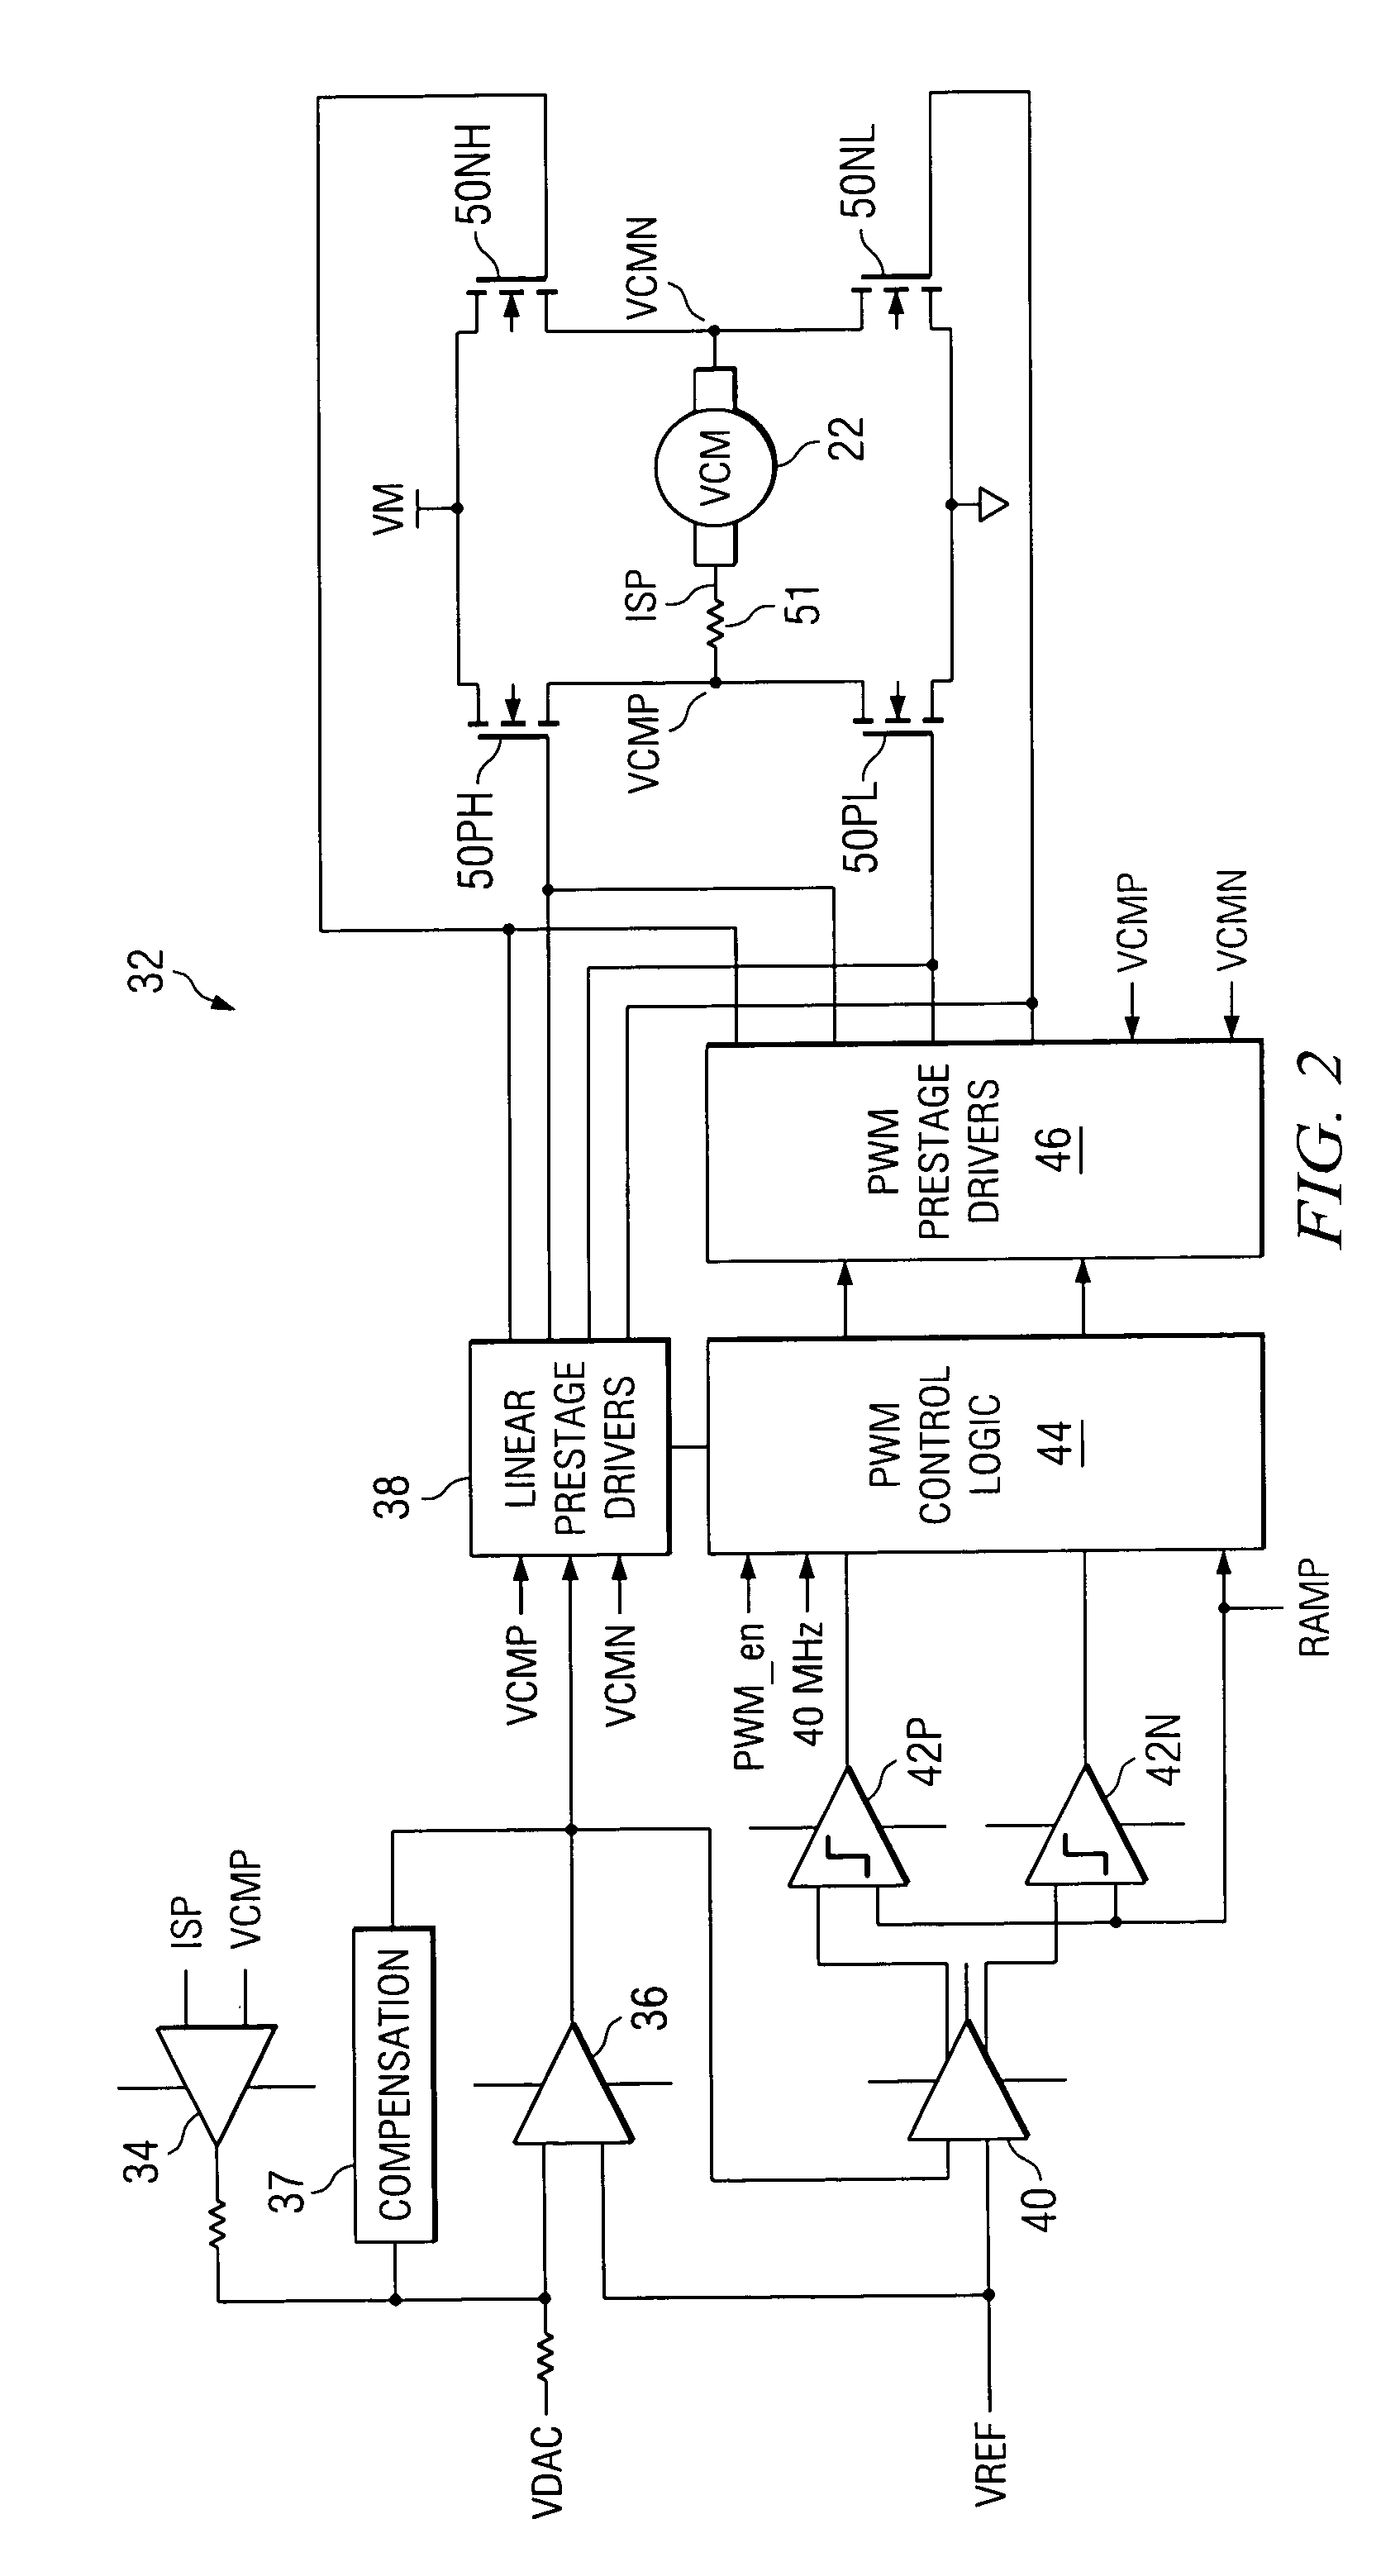 Efficient transition from class D to linear operation in dual-mode voice coil motor controllers